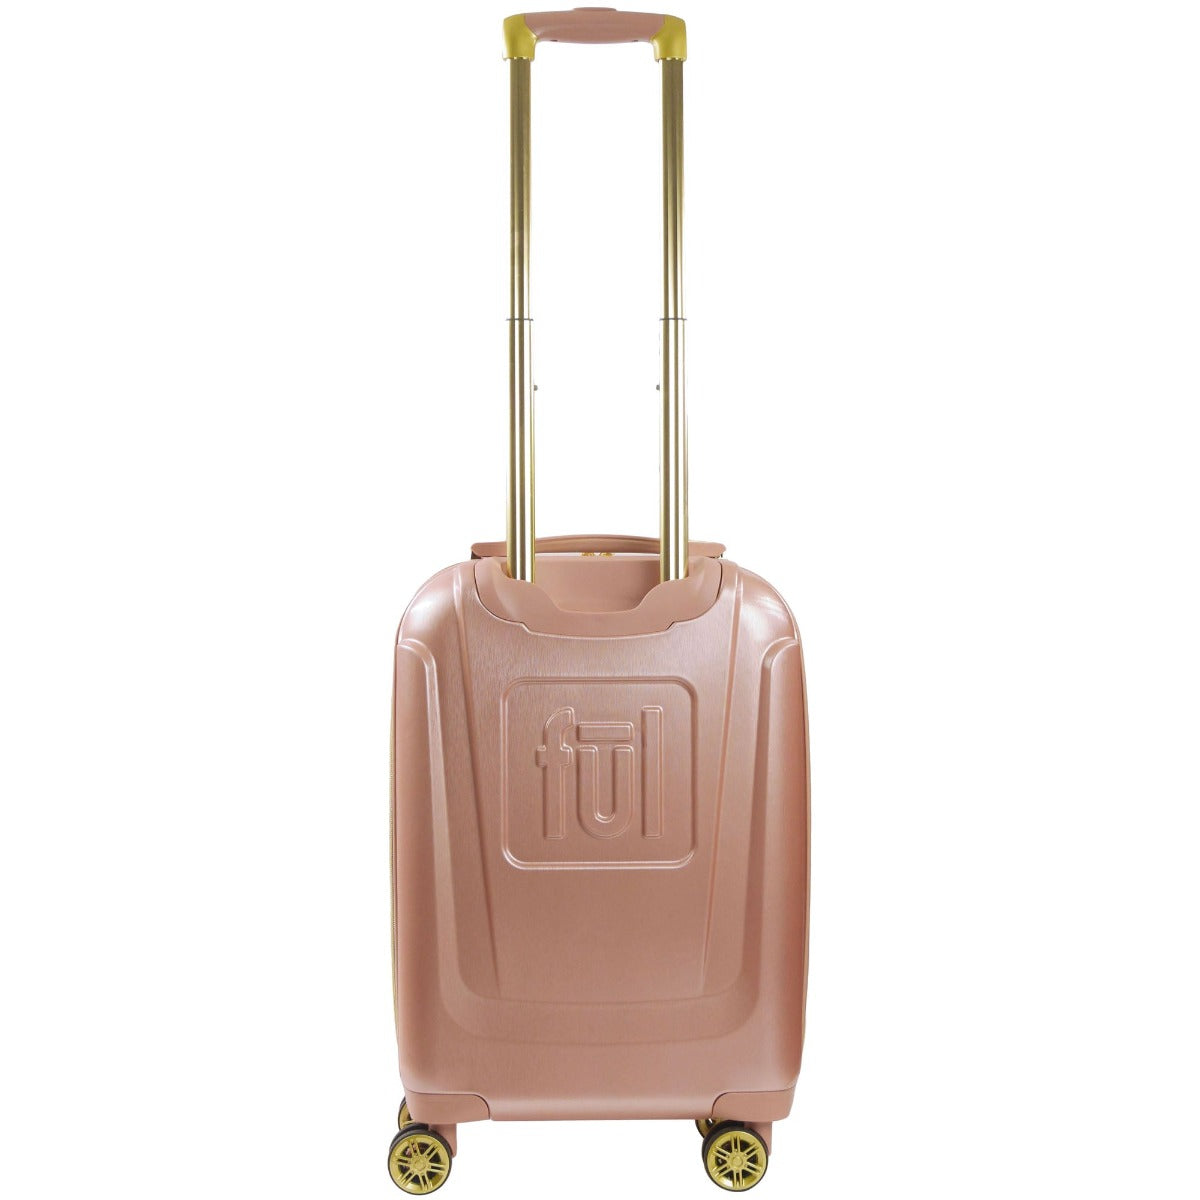 Rose gold Ful Disney Mickey Mouse 22.5 inch hardside spinner luggage with 2 id tags - best carry-on suitcase for traveling